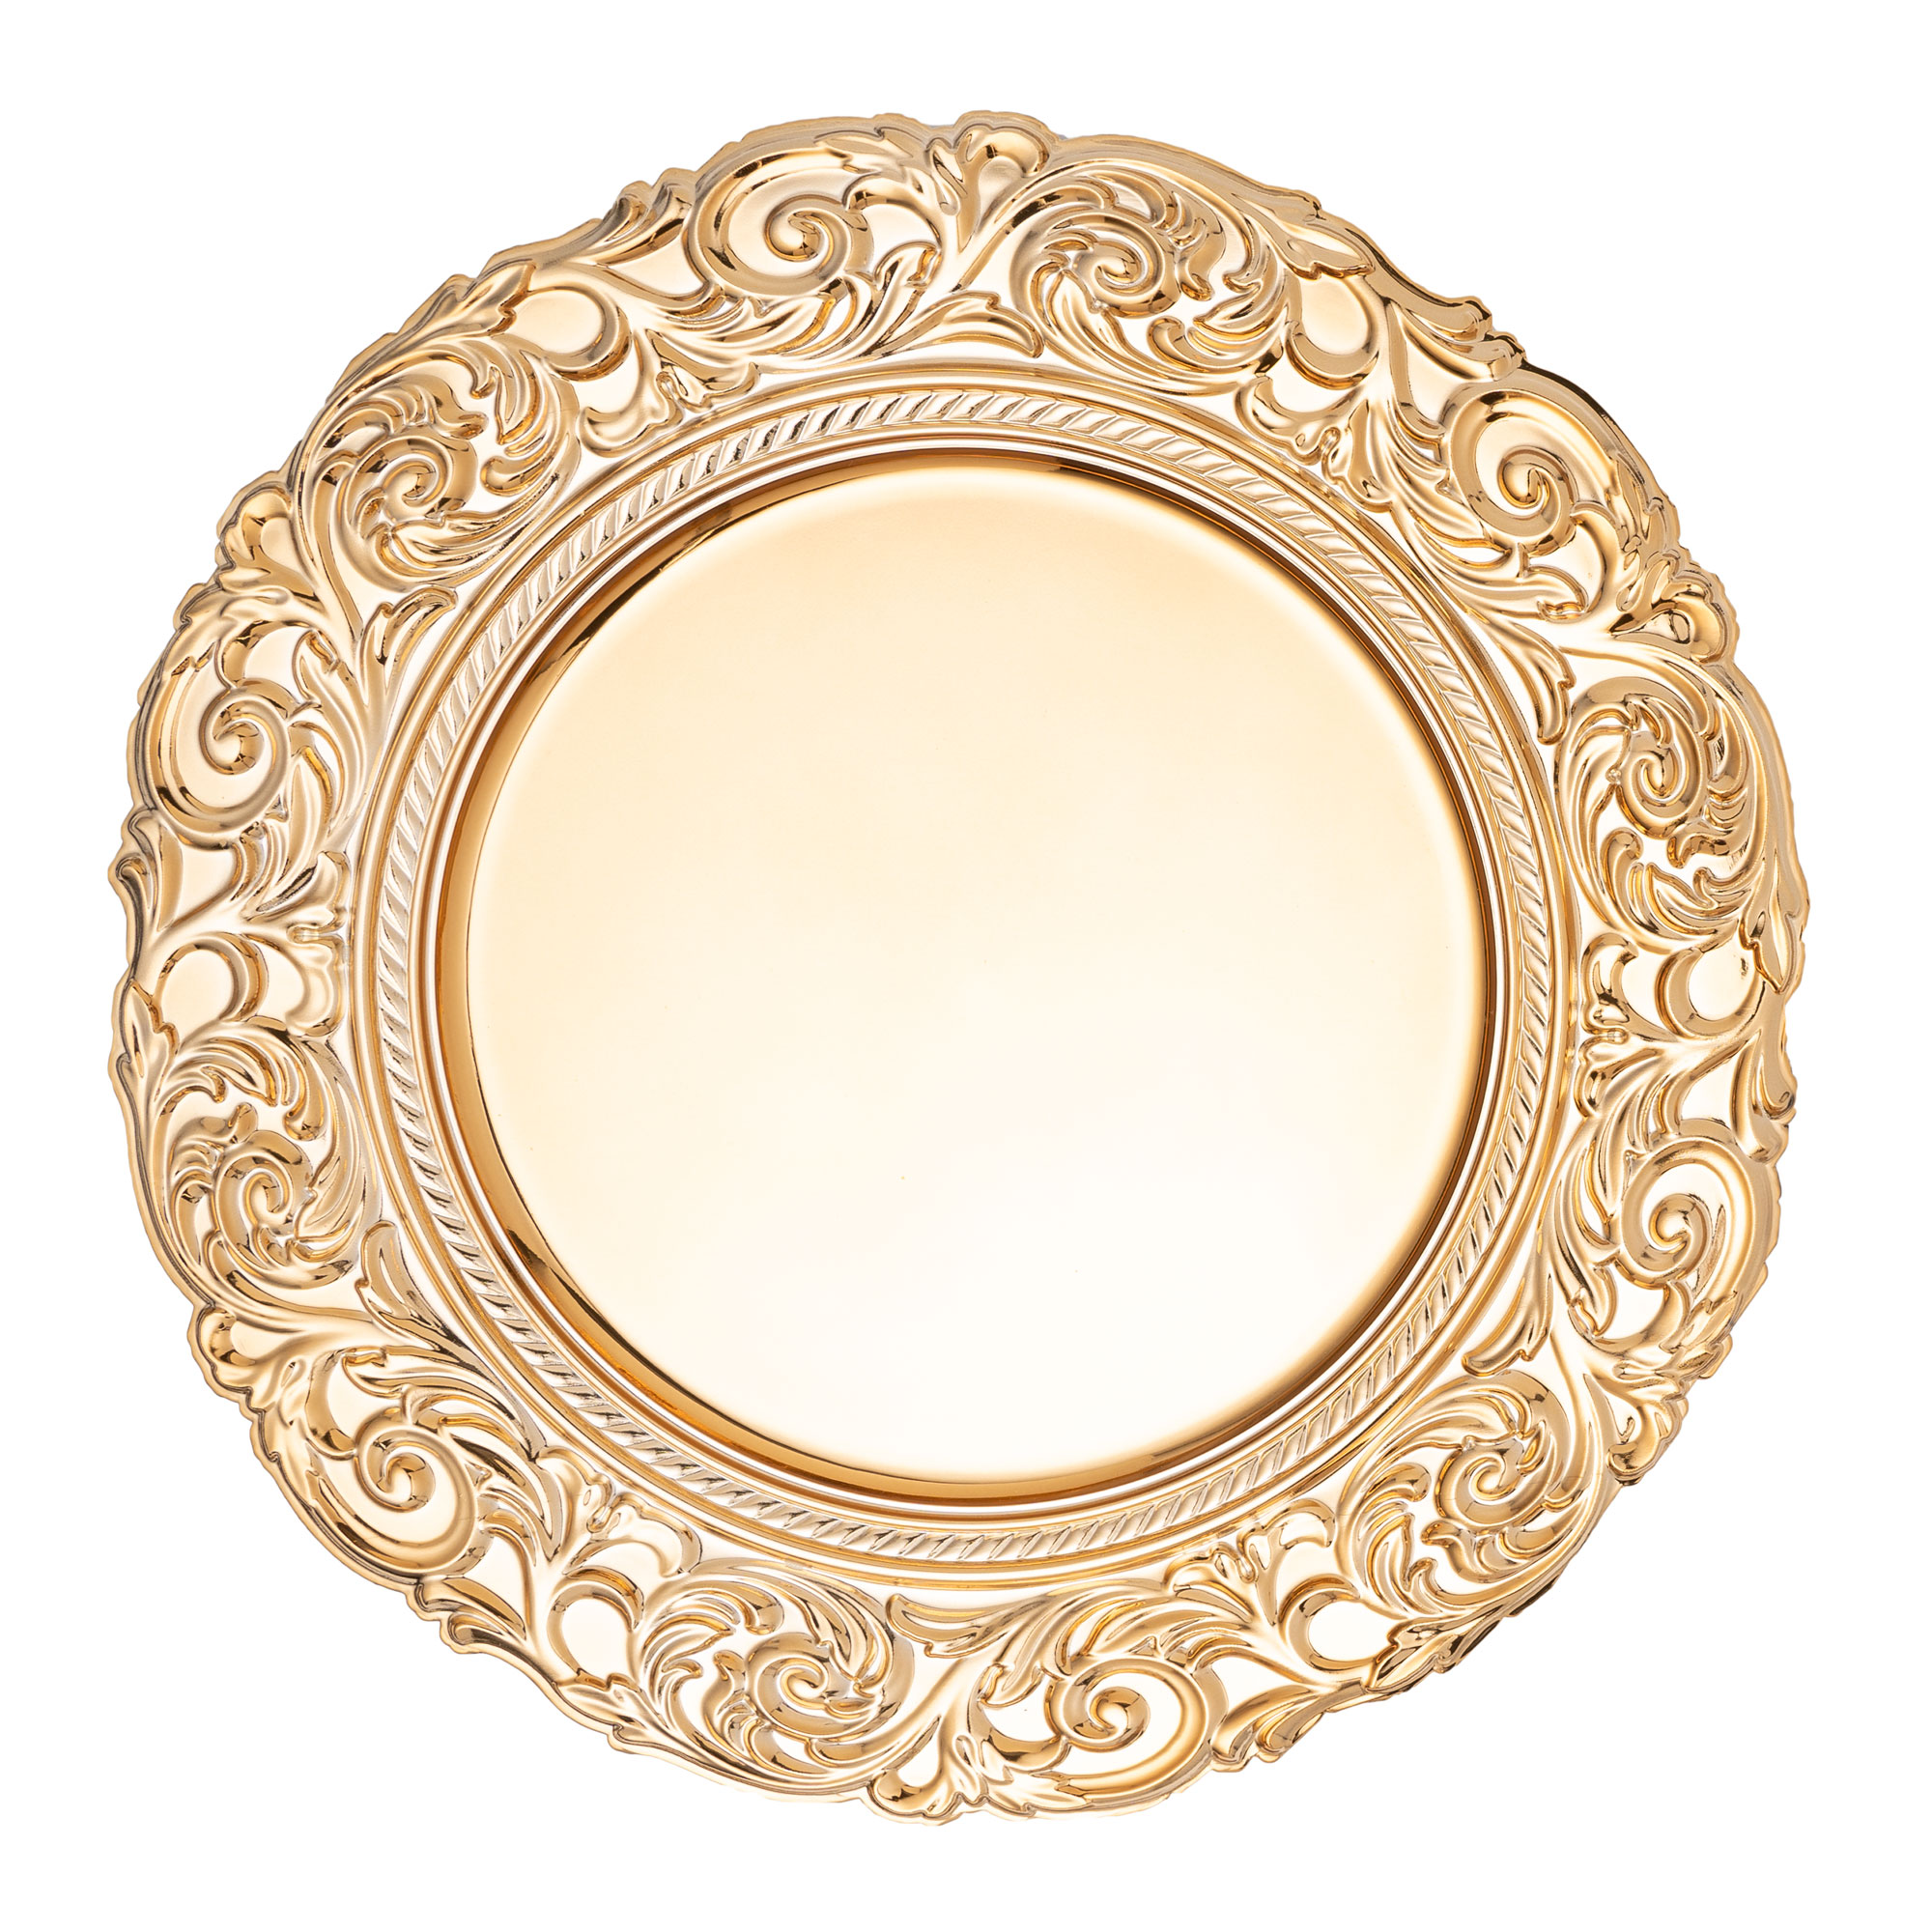 Baroque Plastic Charger Plate With Filigree Rim 14" - Gold